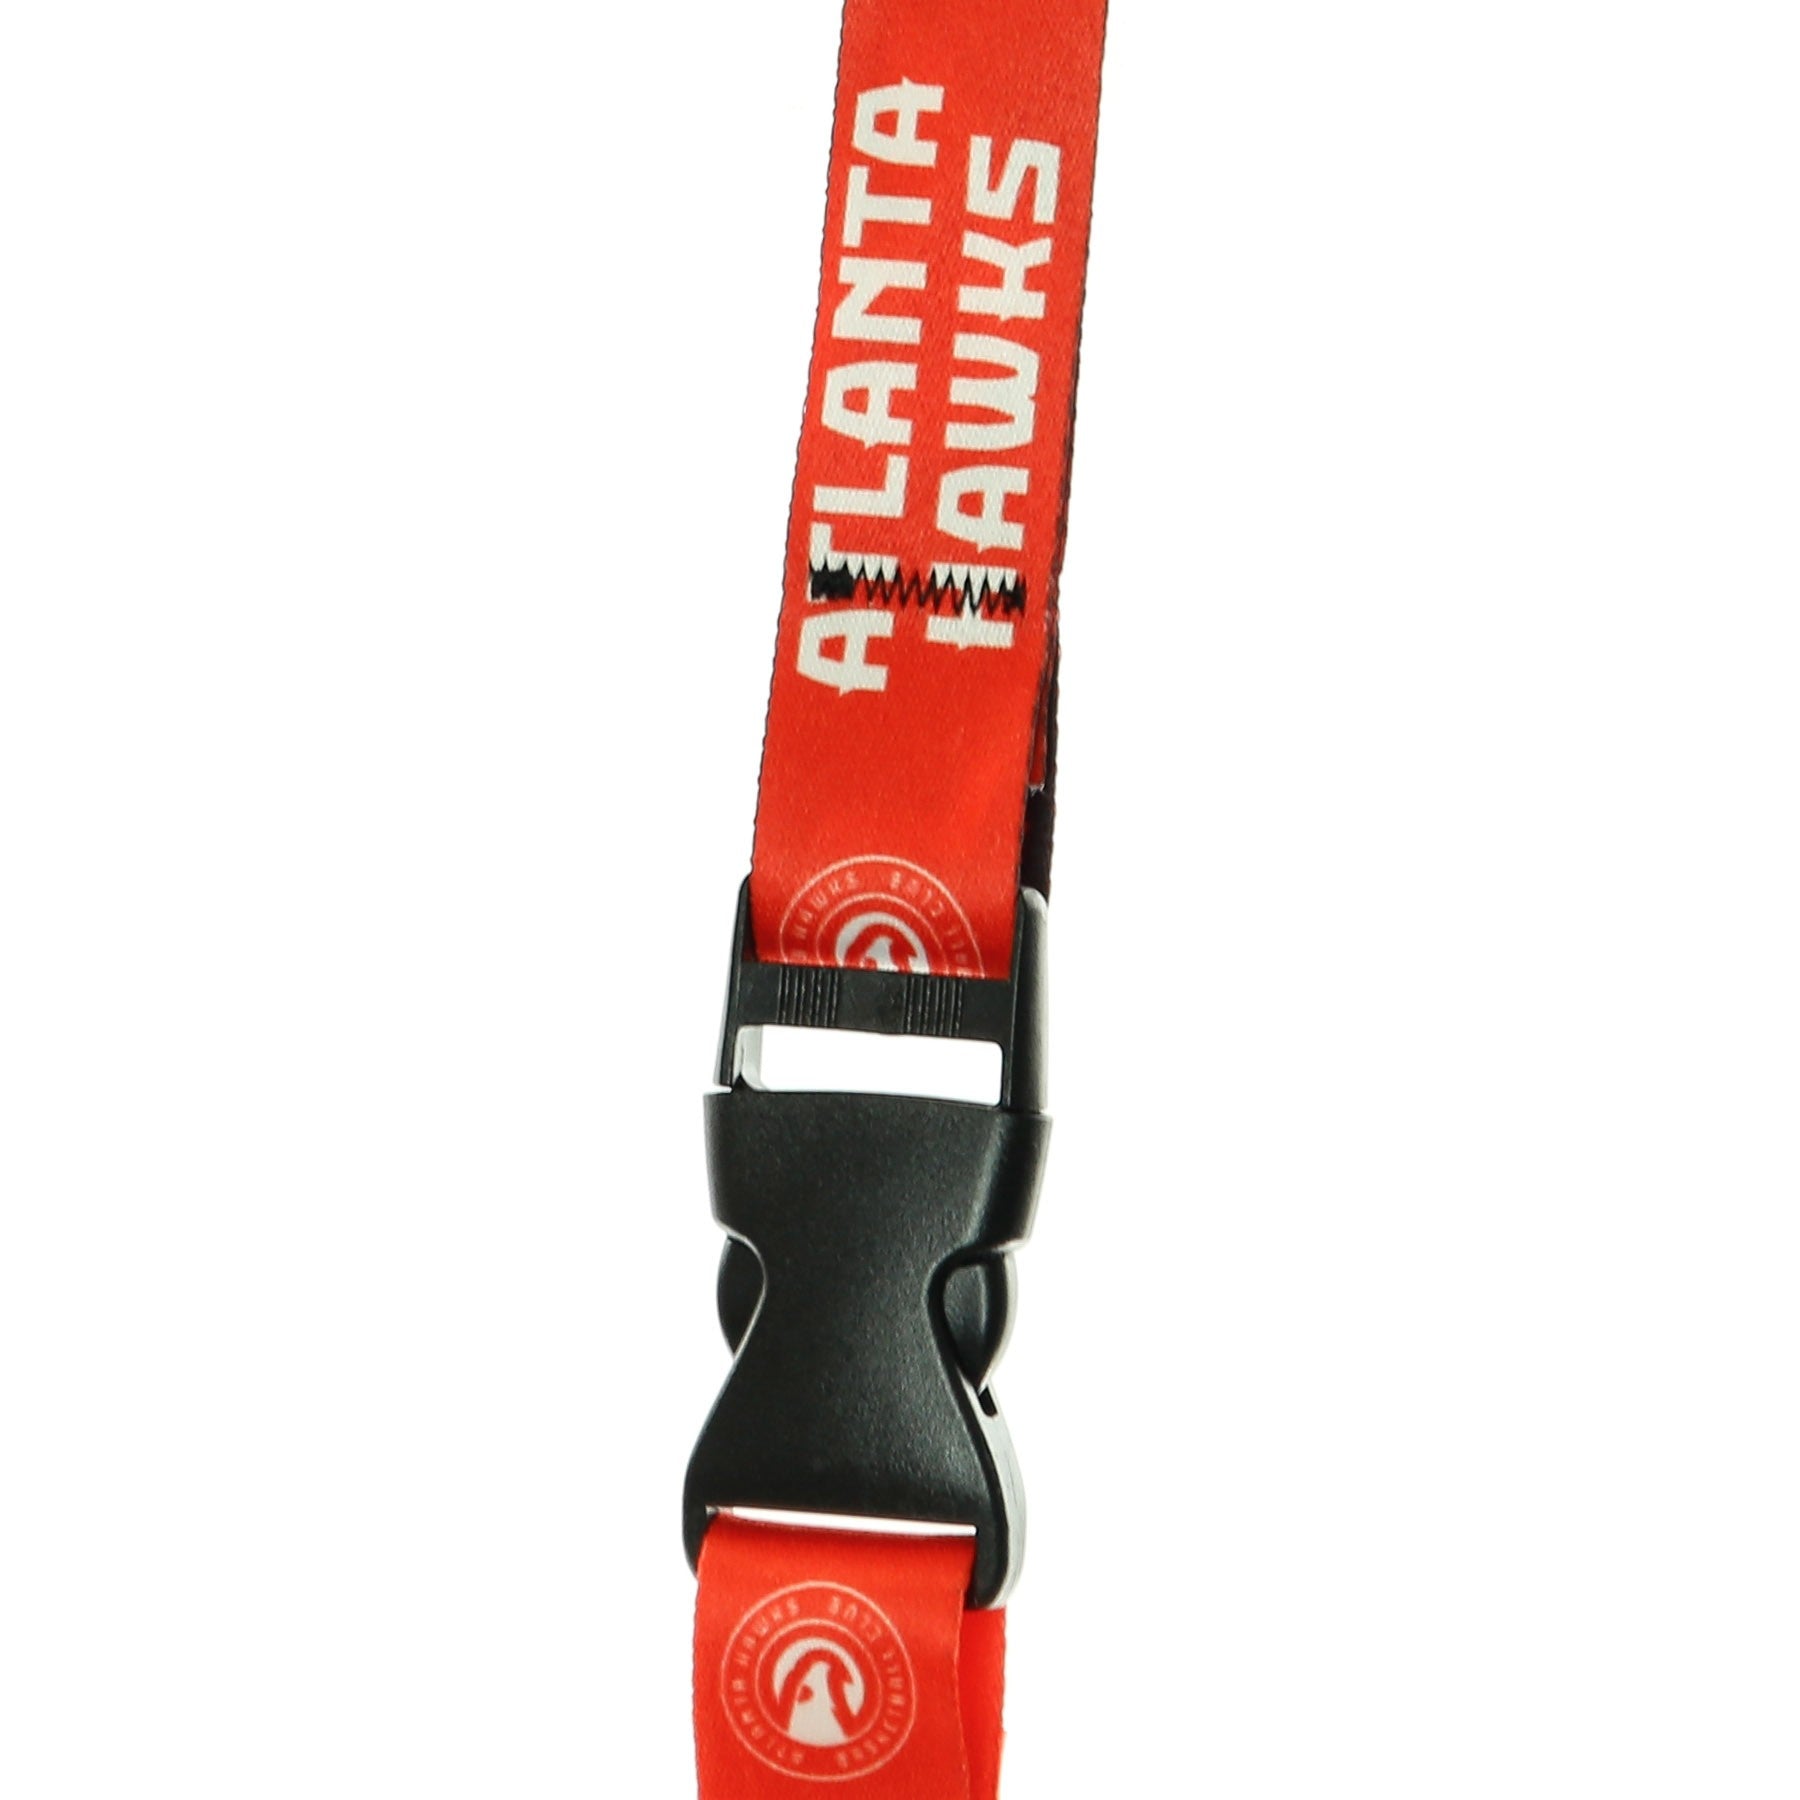 Portachiavi Laccetto Unisex Nba Lanyard With Buckle Atlhaw Original Team Colors